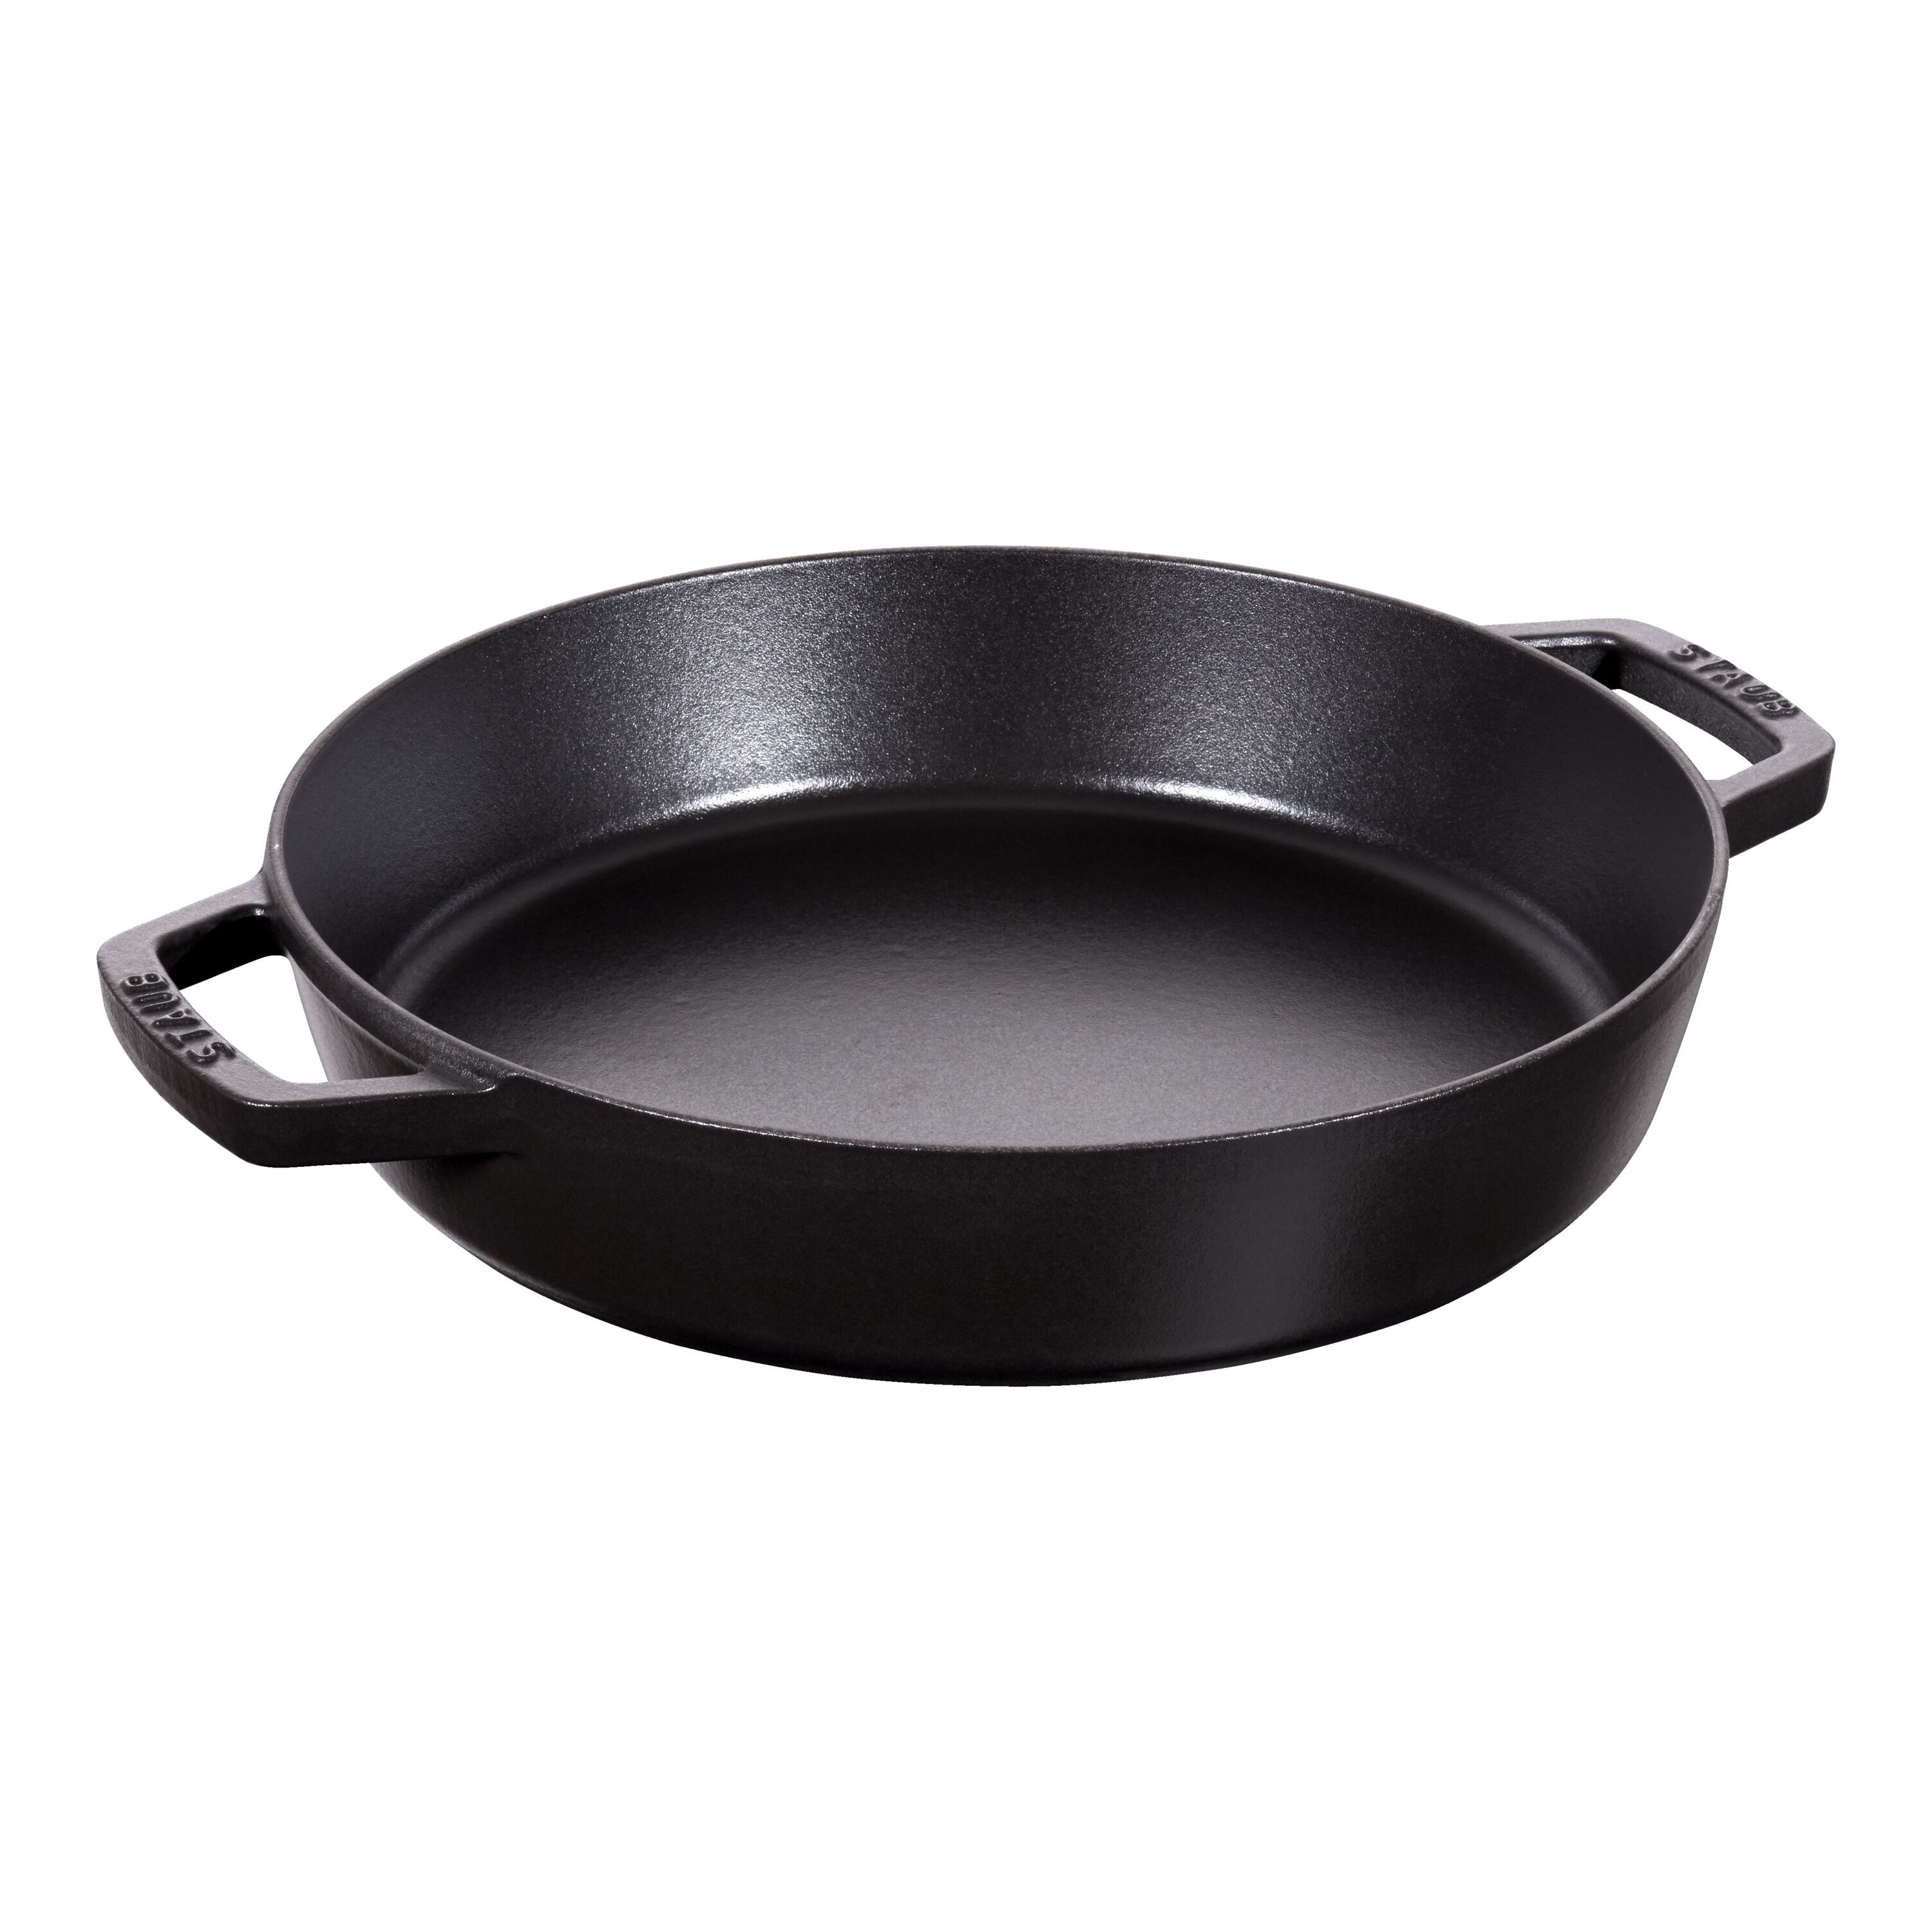 Pros and Cons of Cast Iron Pans - Evergreen Kitchen